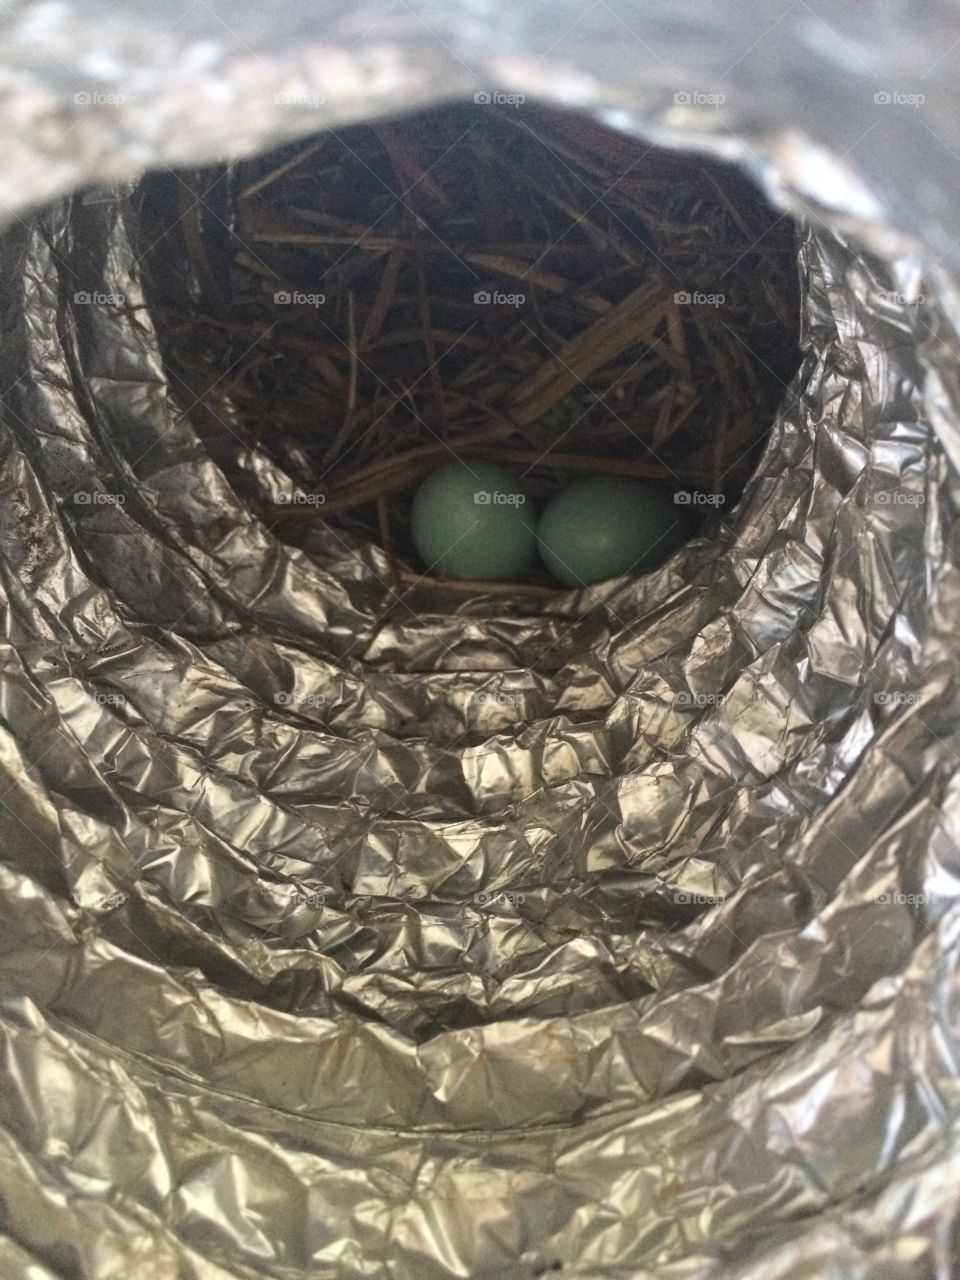 Omg I'm not quite sure why I would do this to my self but long story short I overheated these baby eggs in the dryer vent somehow after only a few days of not doing laundry she made a nest and lay 3 eggs 1 broke n the other 2 well the dryer was on high so yeah. 